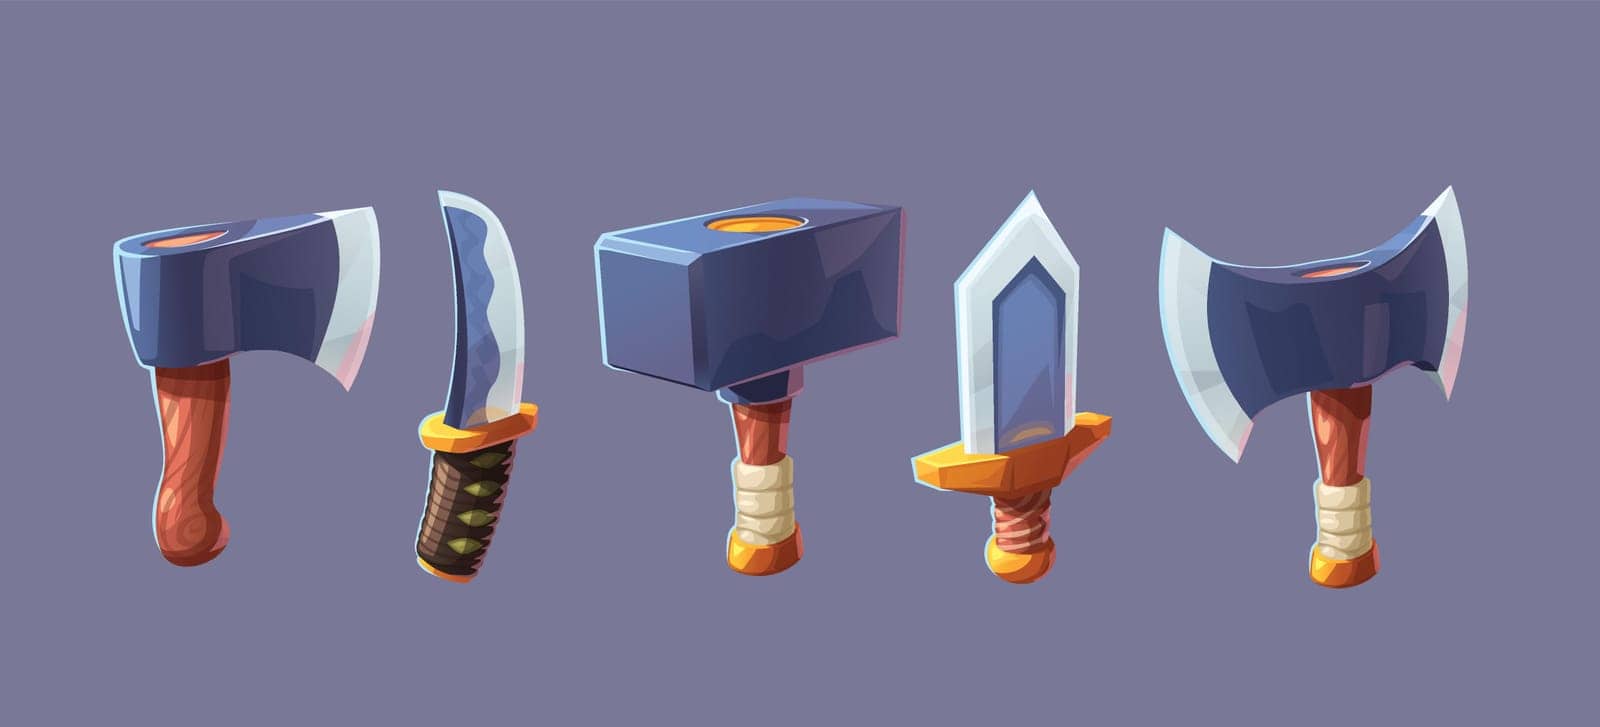 a various cartoon medieval weapon in set by IfH